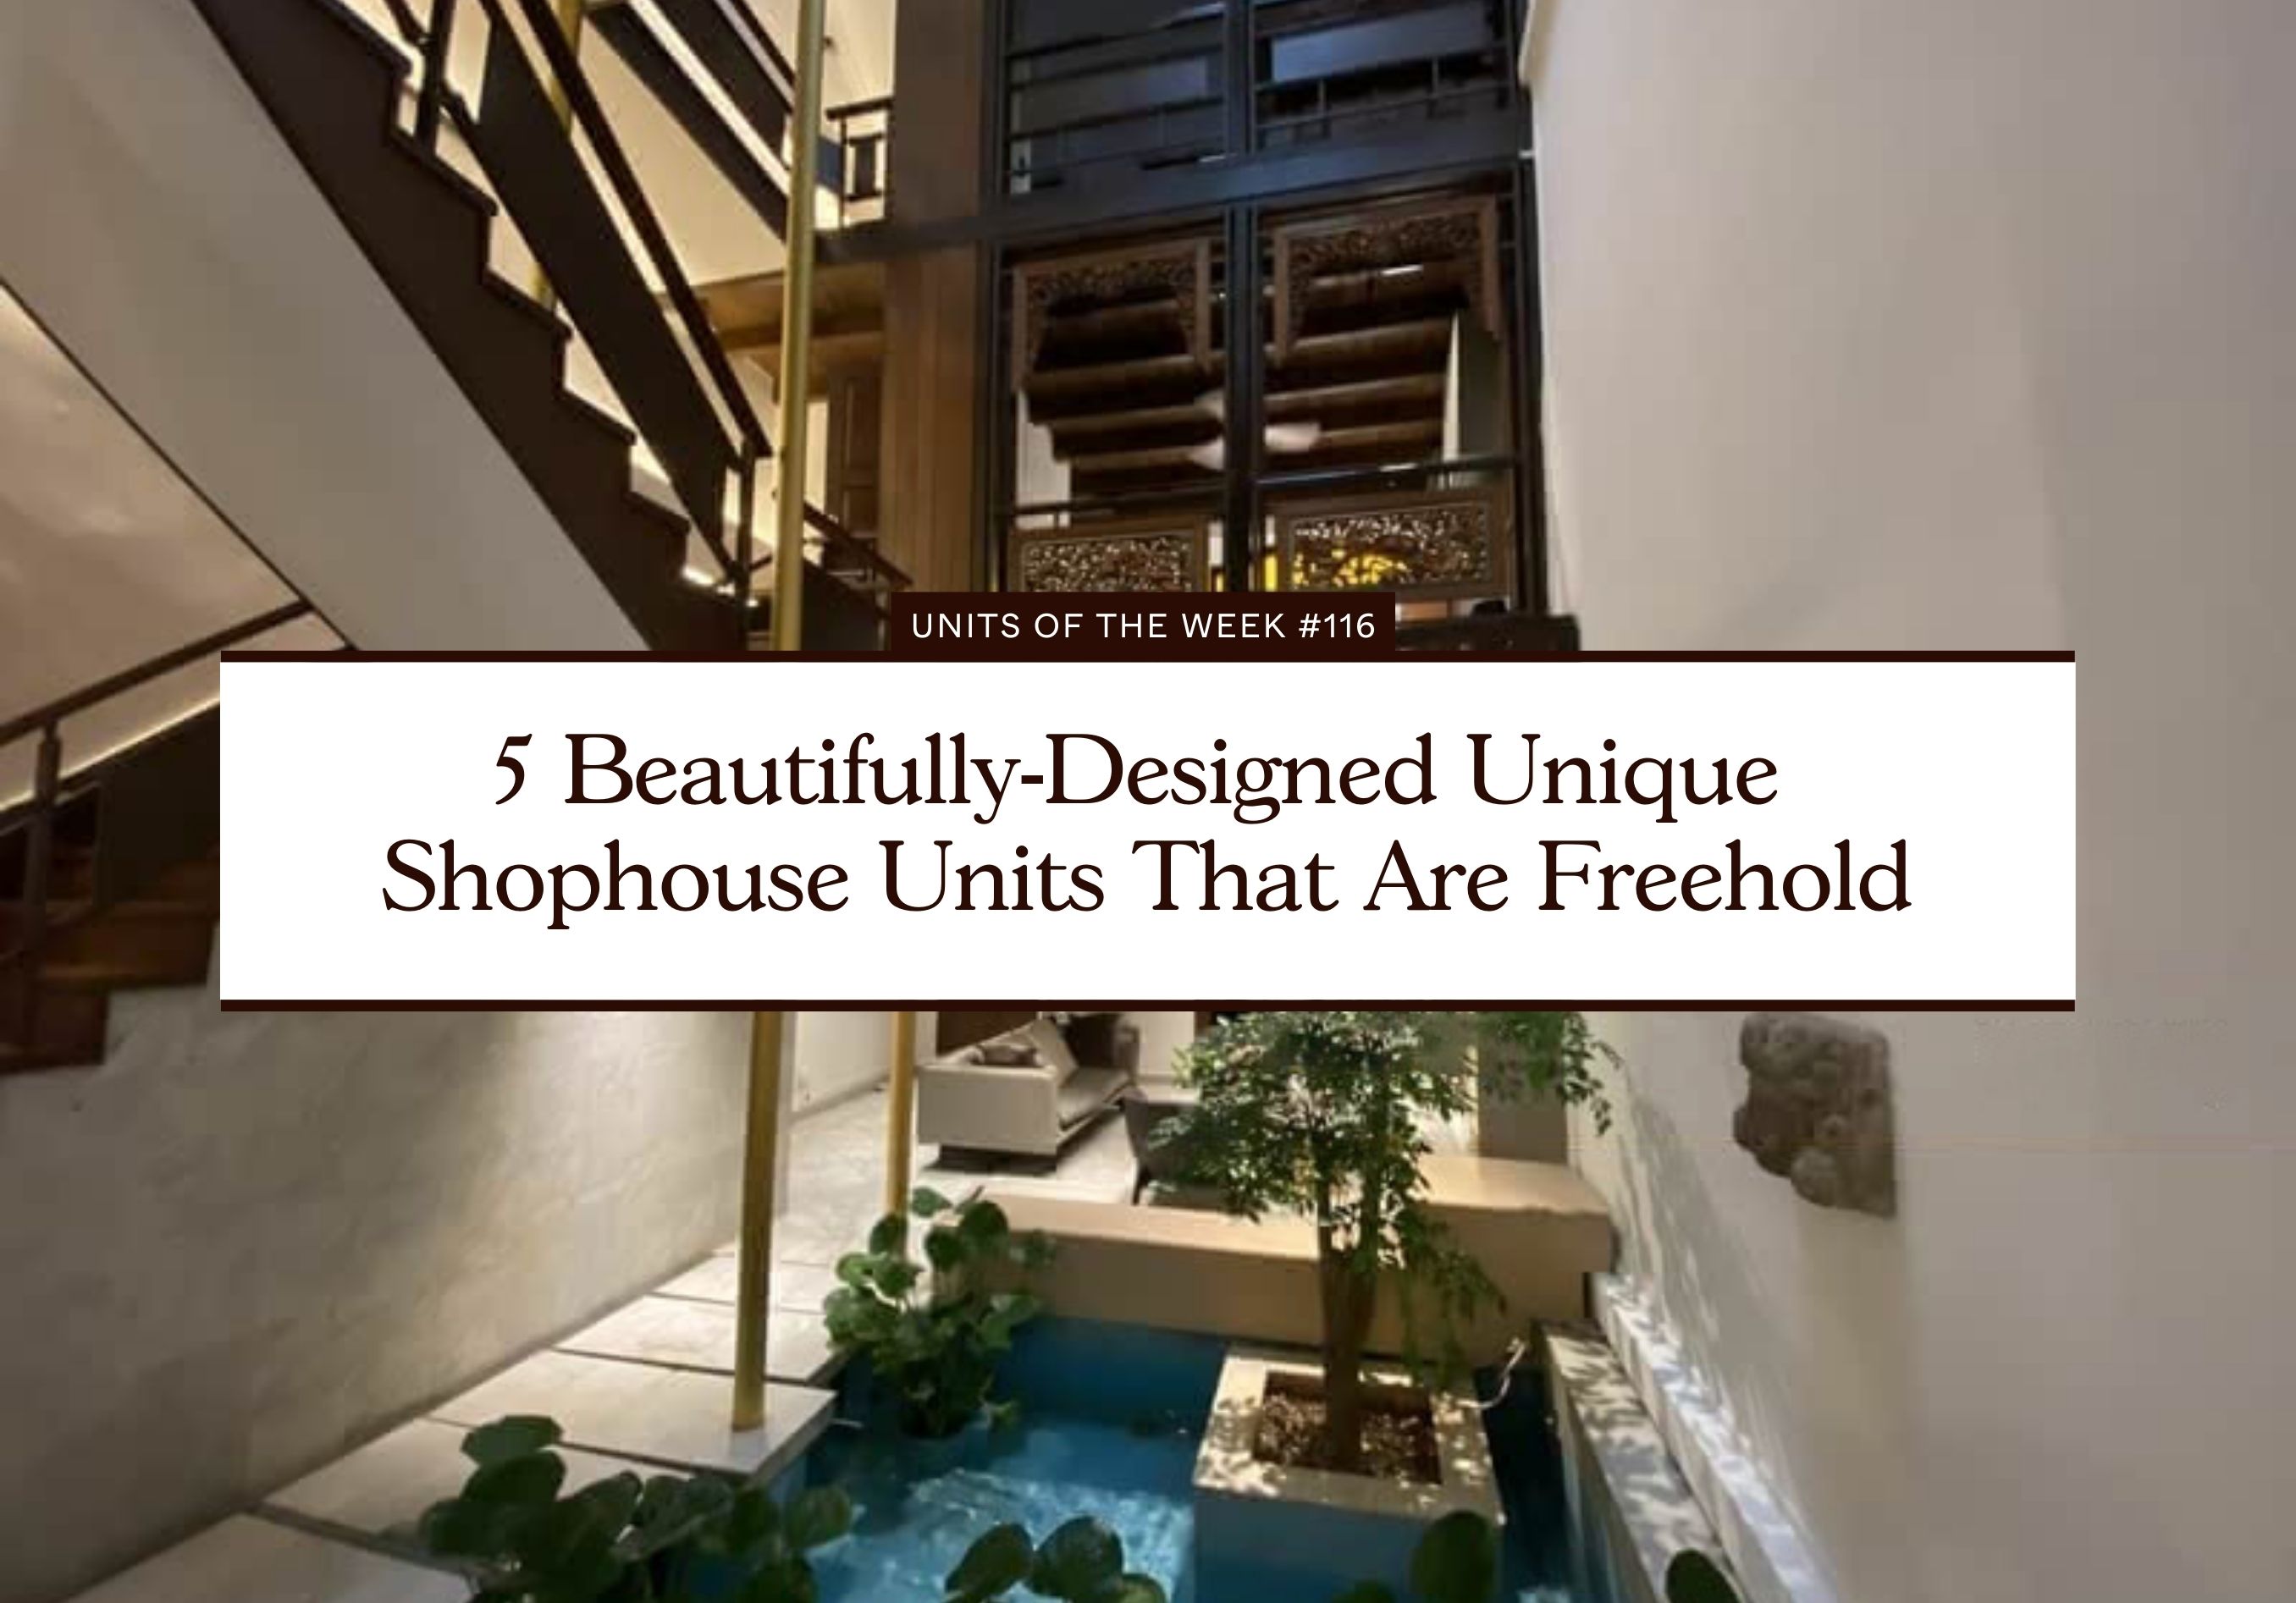 5 Beautifully Designed Unique Shophouse Units That Are Freehold